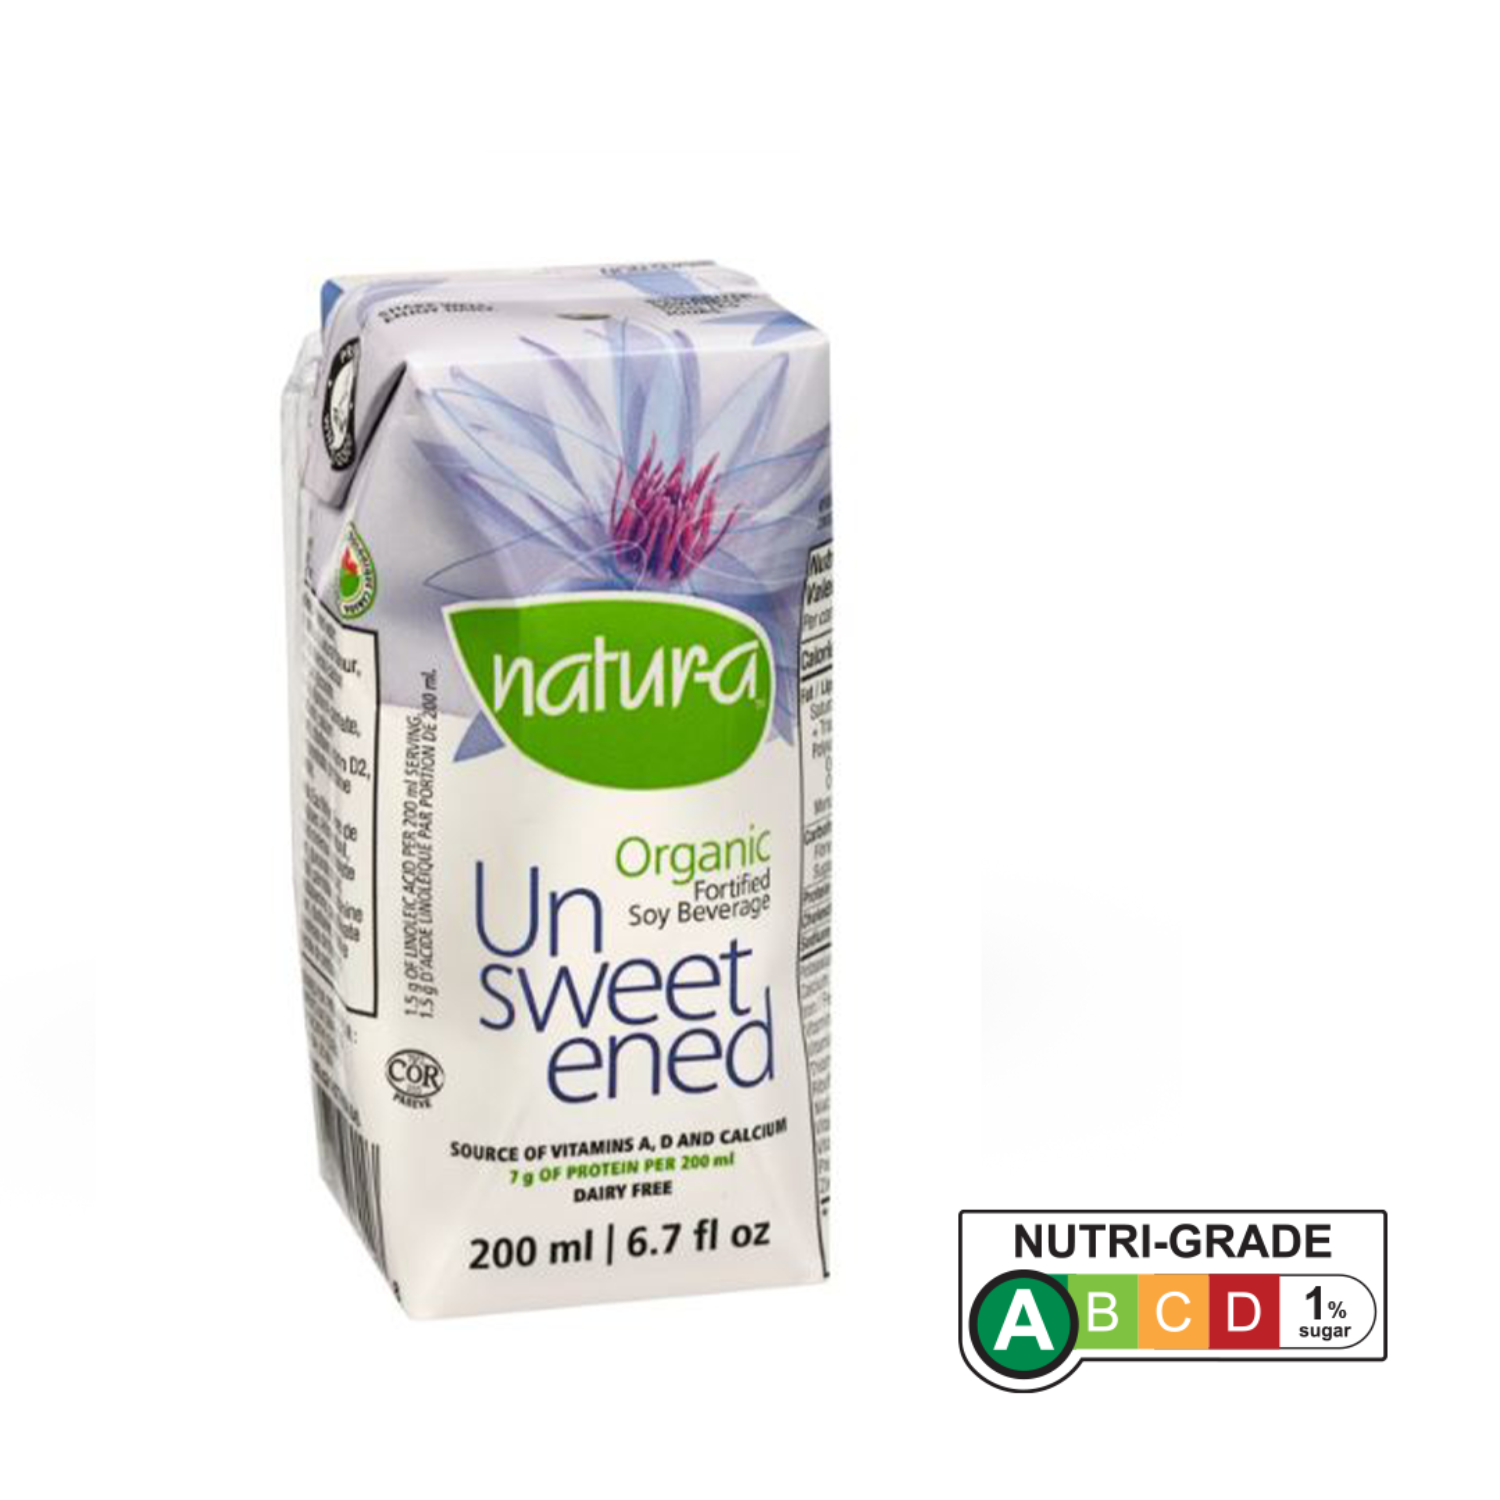 Natur-a Enriched Soy Beverage - Unsweetened (Organic), 200 ml. - Single Pack (Expiry: 24/05/2024)